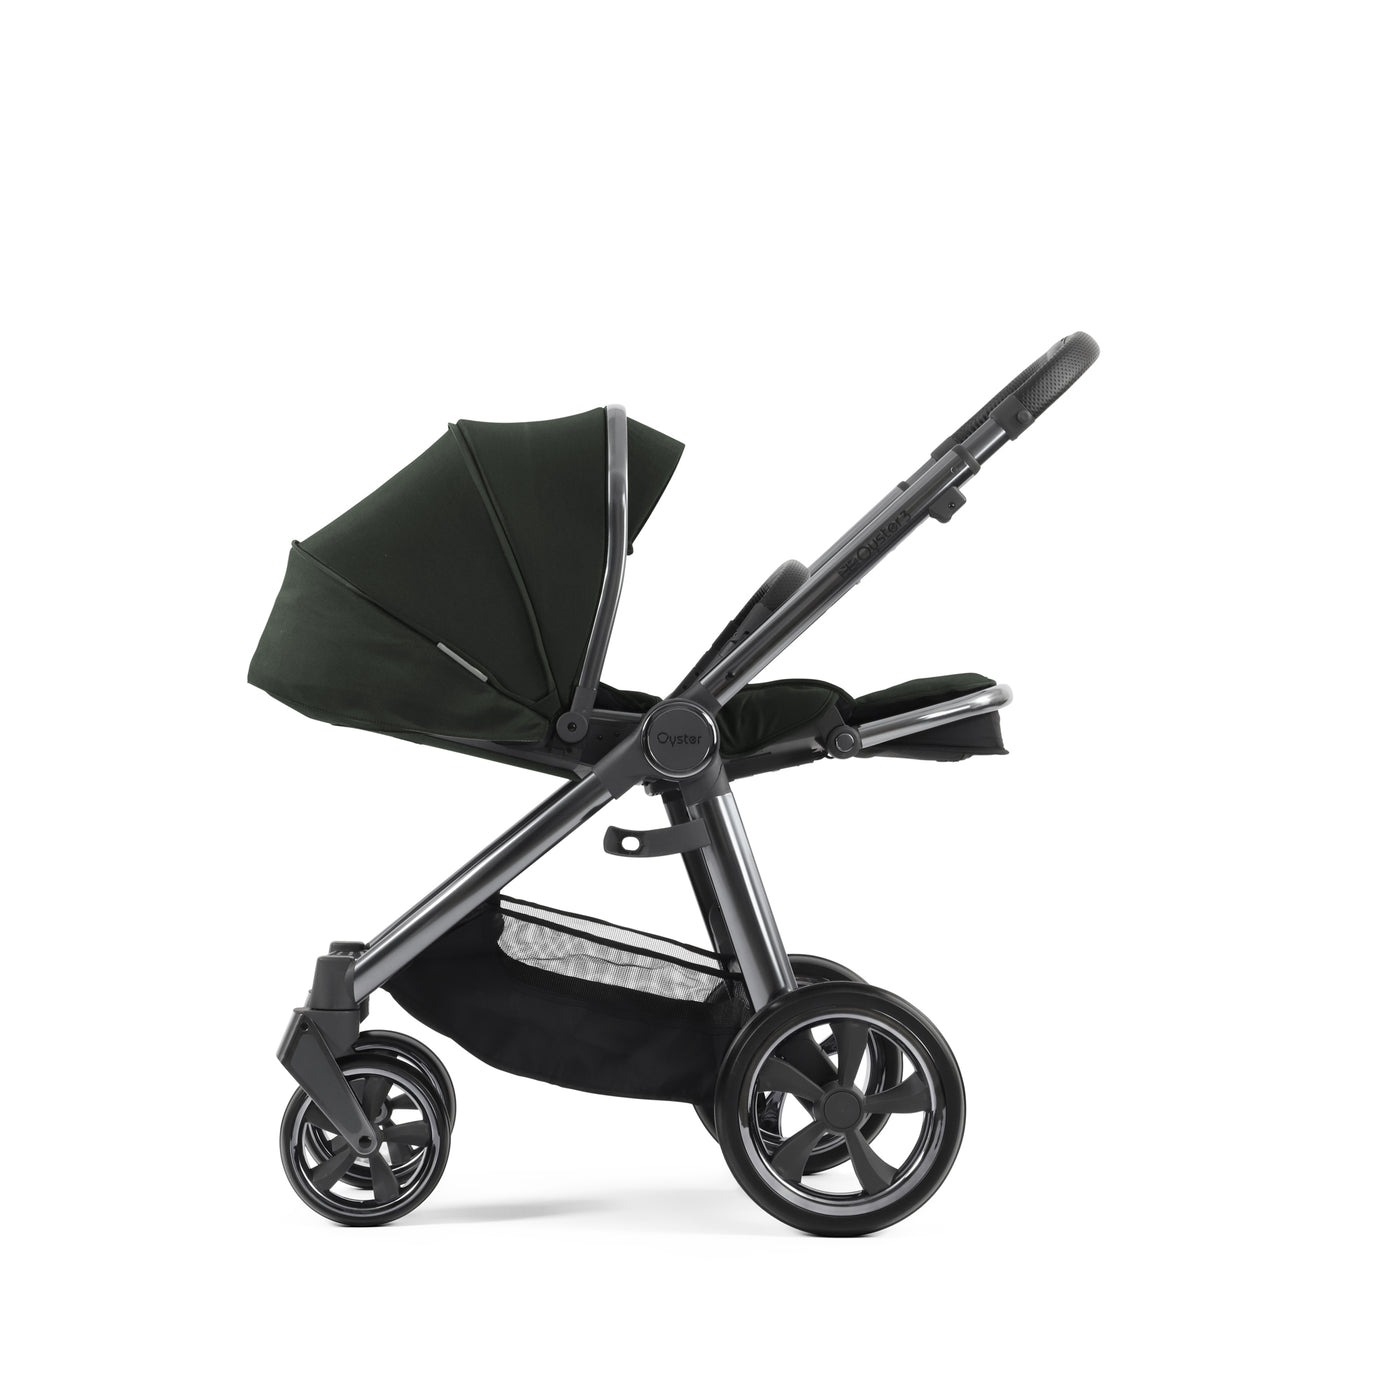 Babystyle Oyster 3 Pushchair - Black Olive